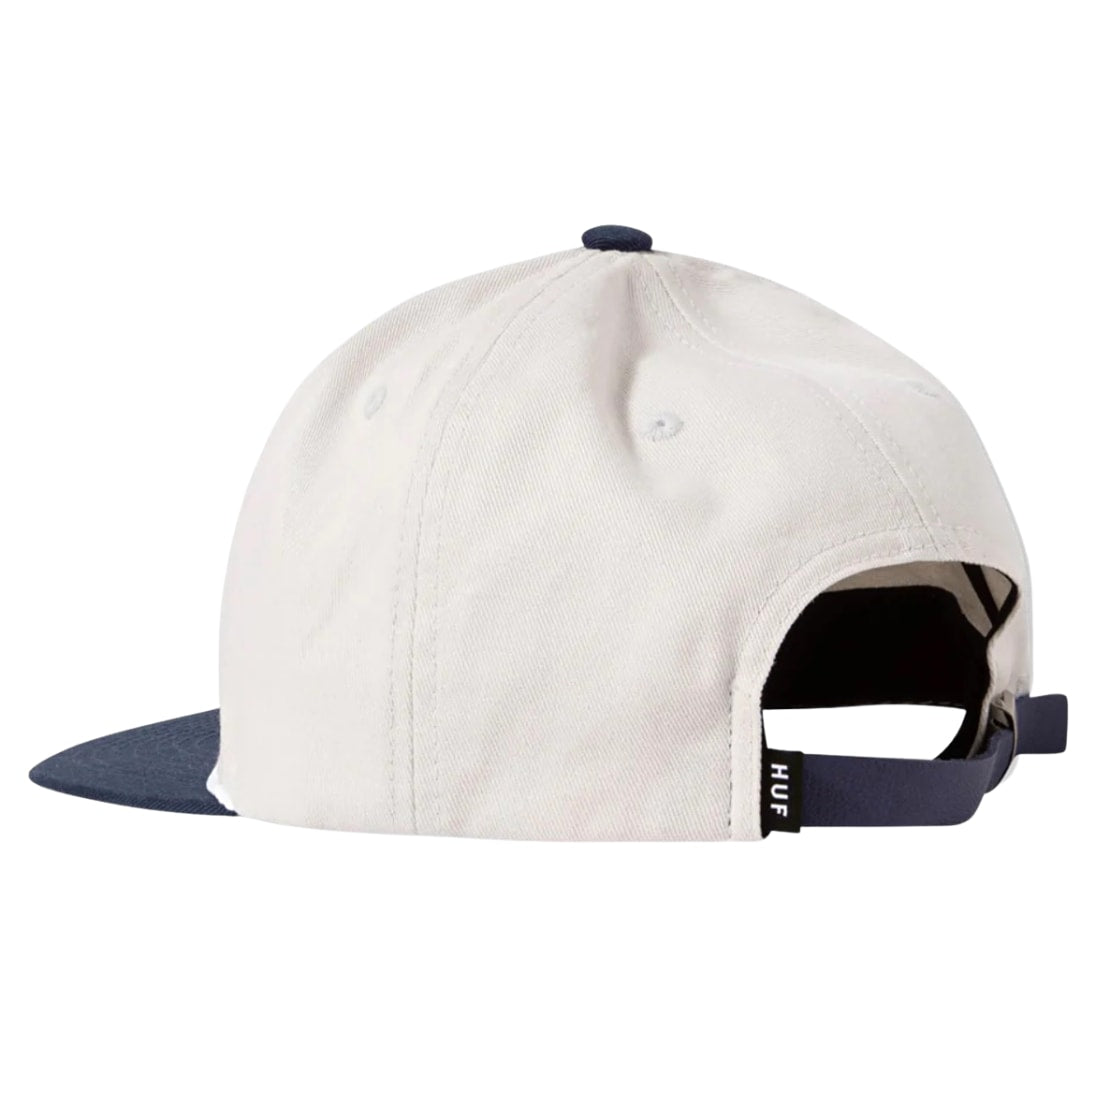 Huf Global Solutions 5 Panel Snapback Cap - Cream - Snapback Cap by Huf One Size